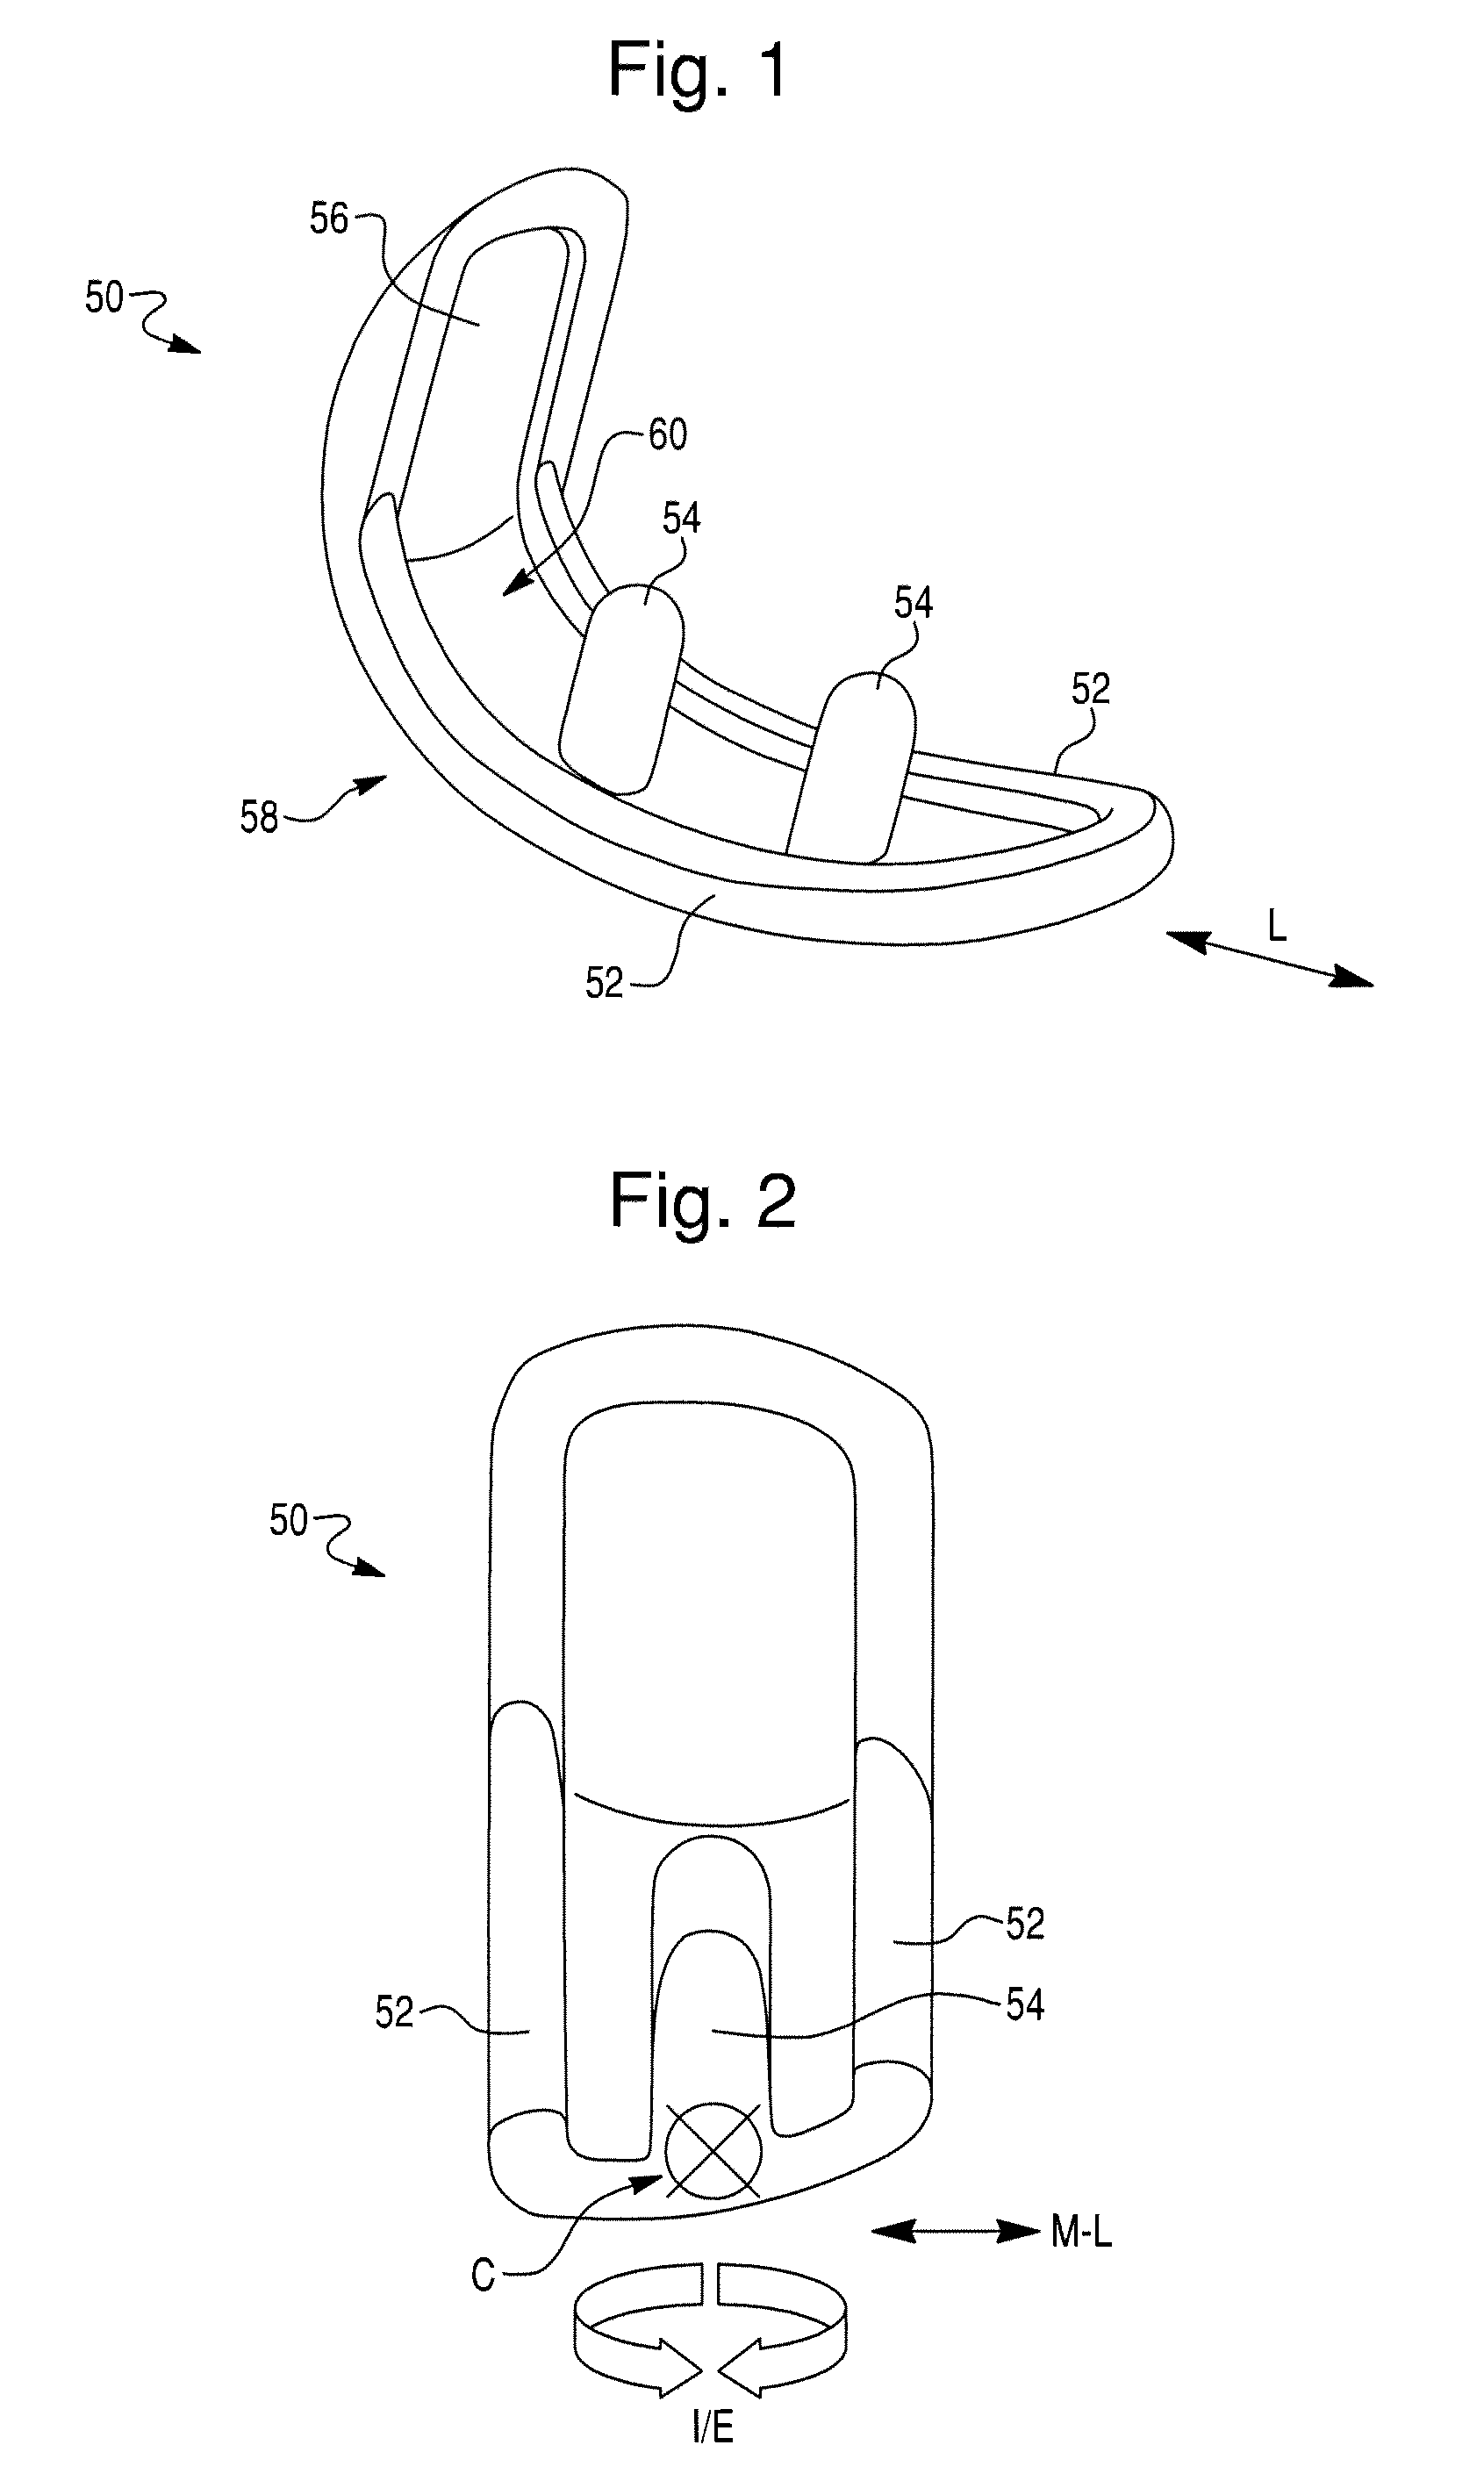 Prosthetic device for knee joint and methods of implanting and removing same